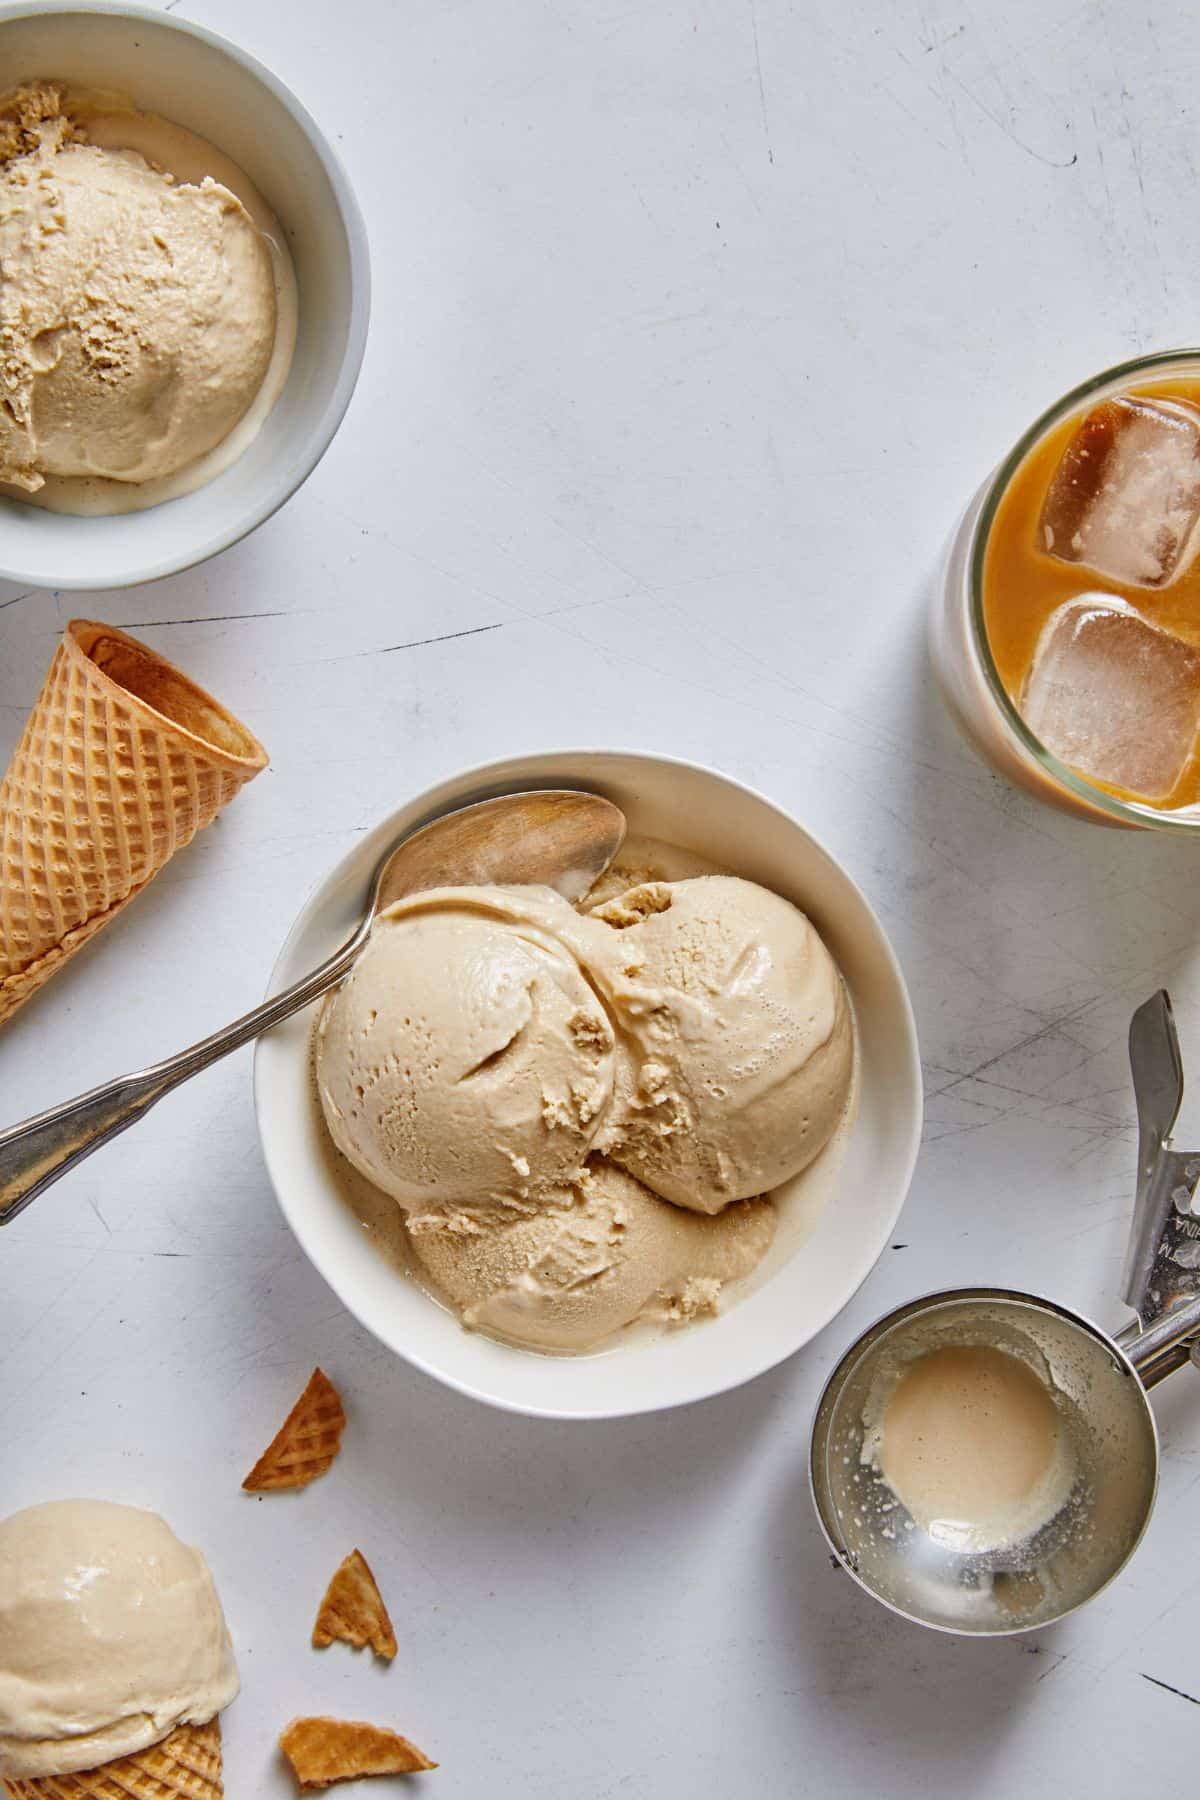 Three scoops of coffee ice cream in a bowl with ice cream cones, a cup of coffee and a scoop of ice cream around it